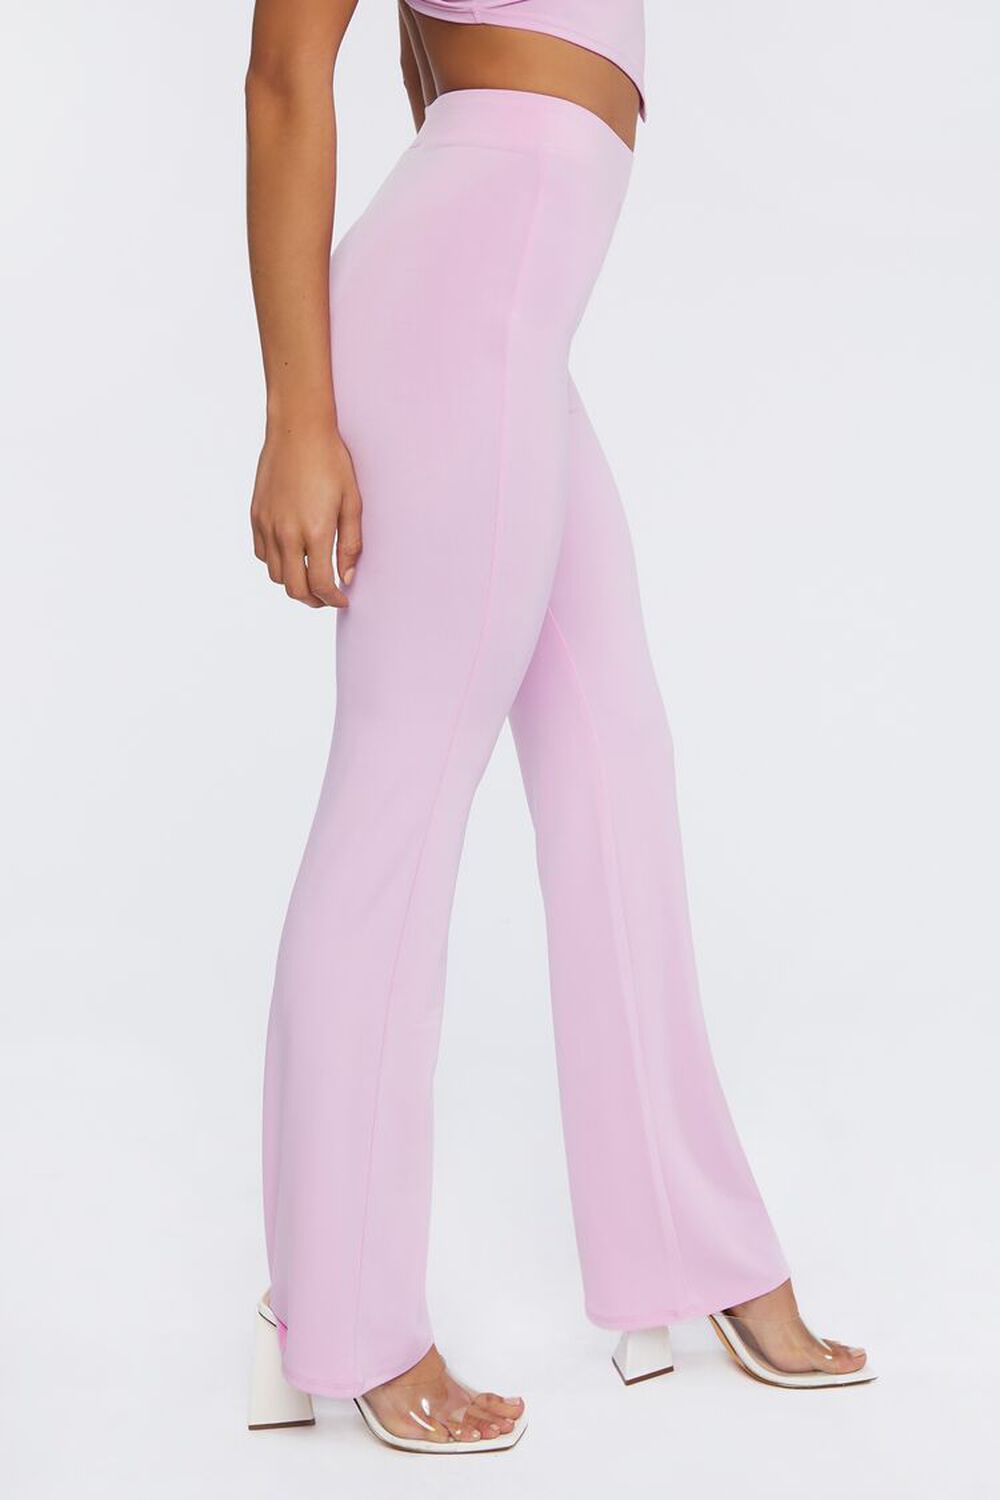 WISTERIA Jersey Knit High-Rise Pants, image 3